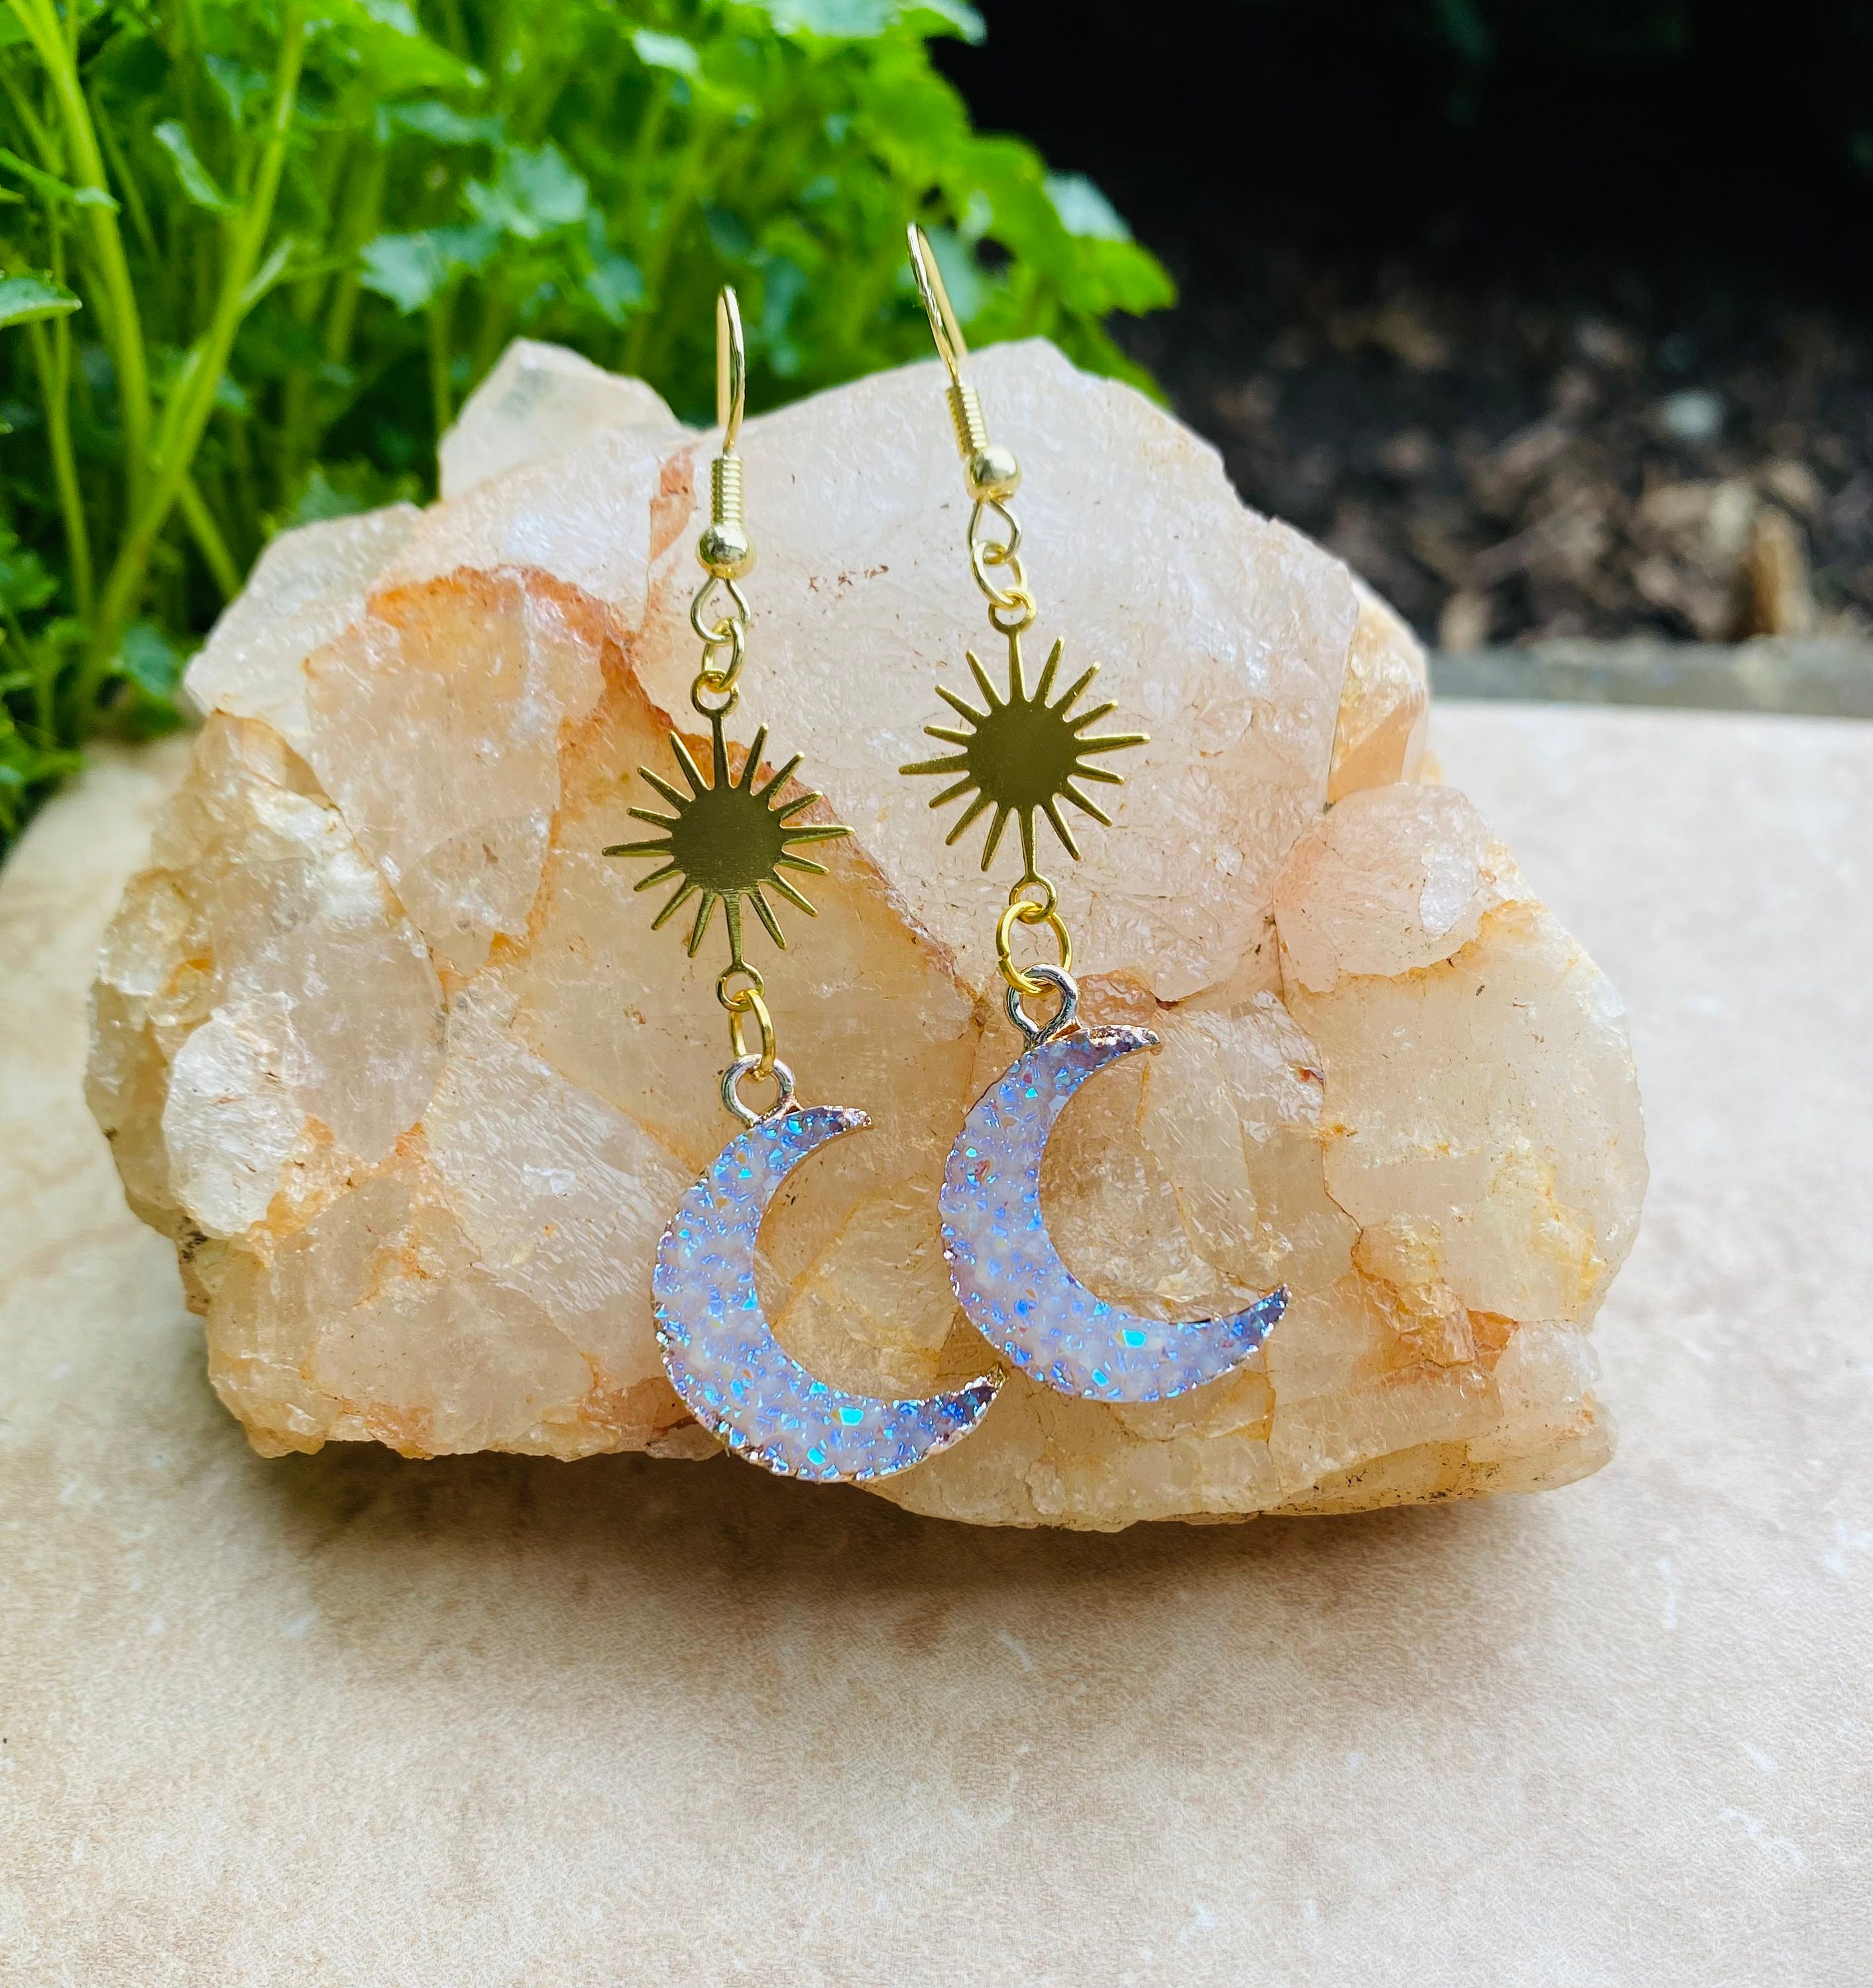 Apengshi Natural Crystal Cherry Blossom Agate Sun Moon Earrings Healing Crystal Stones Celestial Crescent Moon Star Pendant Earrings Reiki Holiday